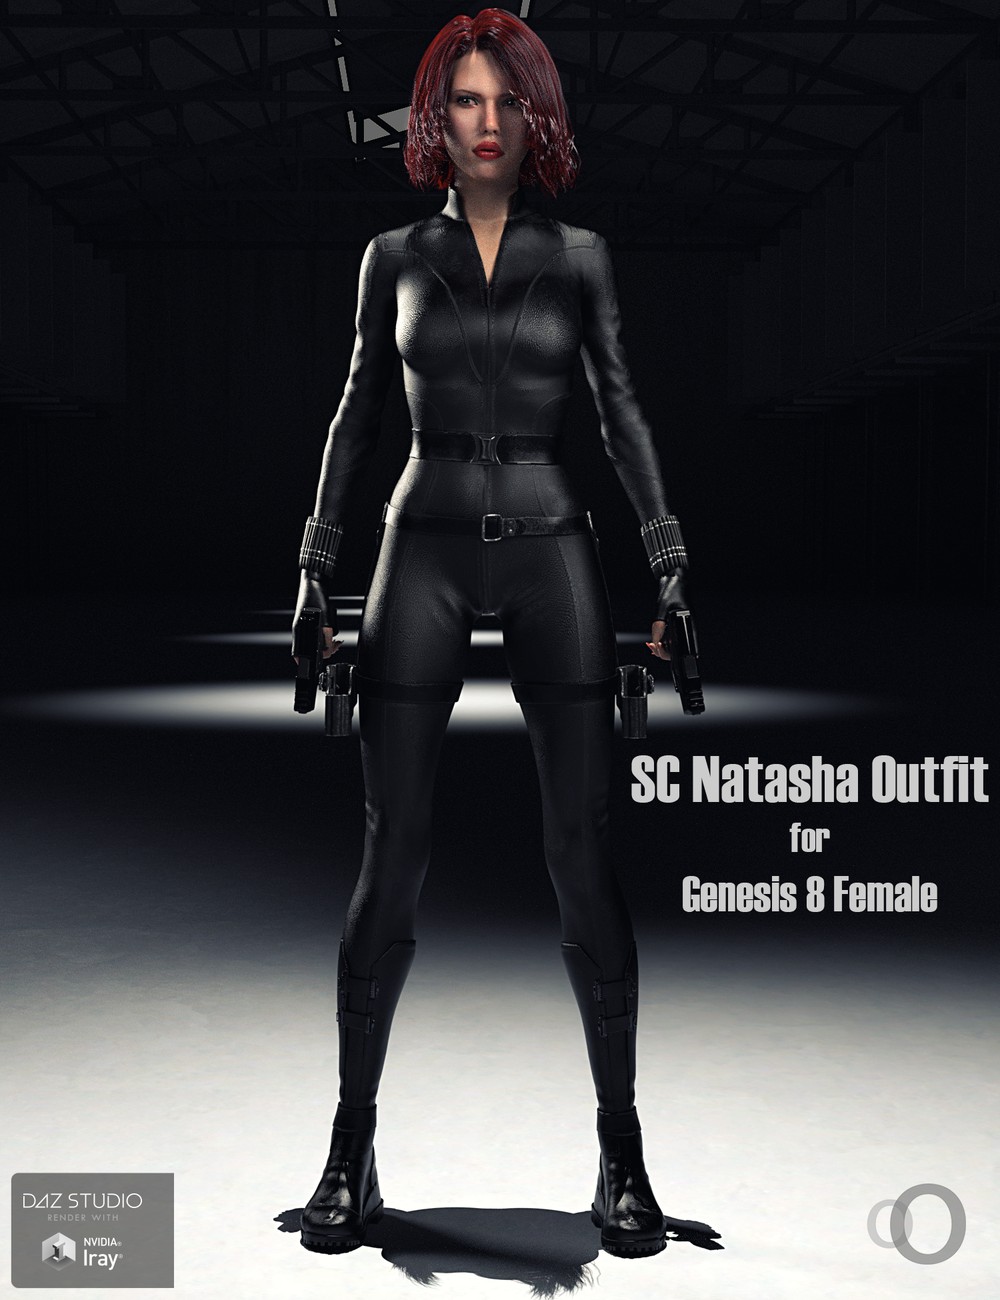 SC Natasha Outfit for Genesis 8 Female by second-circle on DeviantArt